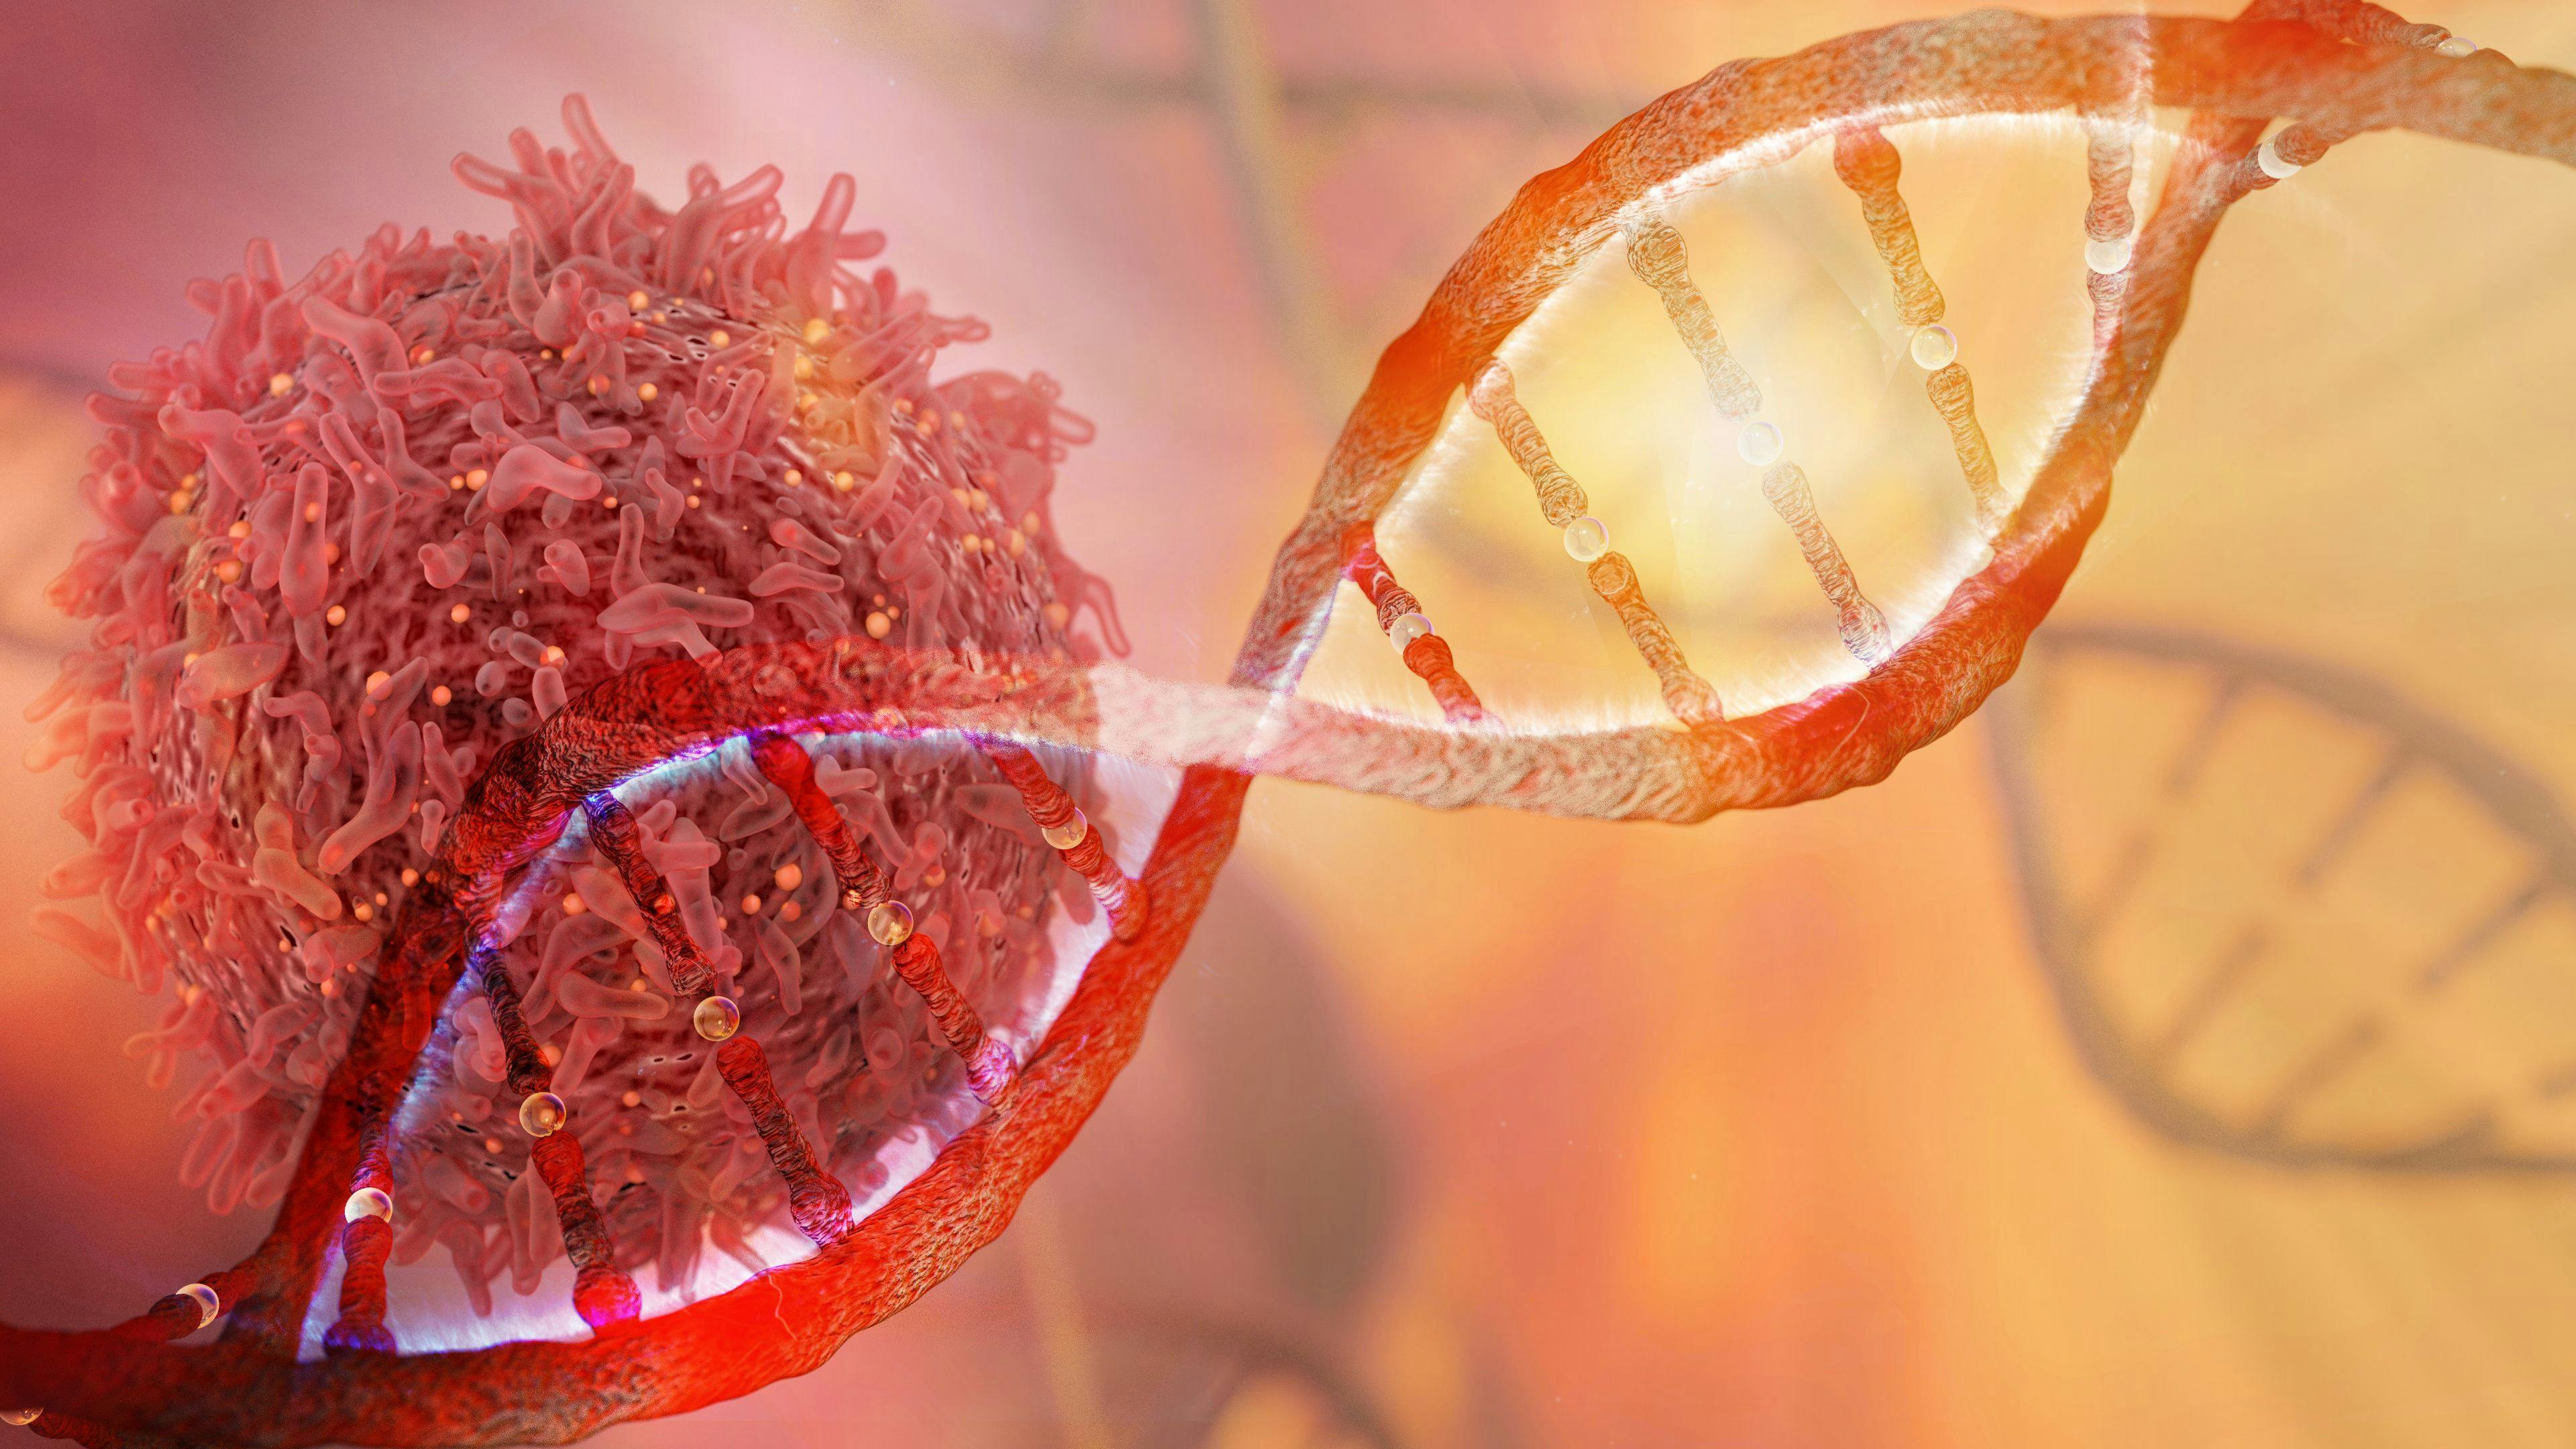 Genomic Testing Offers New Therapy Options for Hepatobiliary Cancers